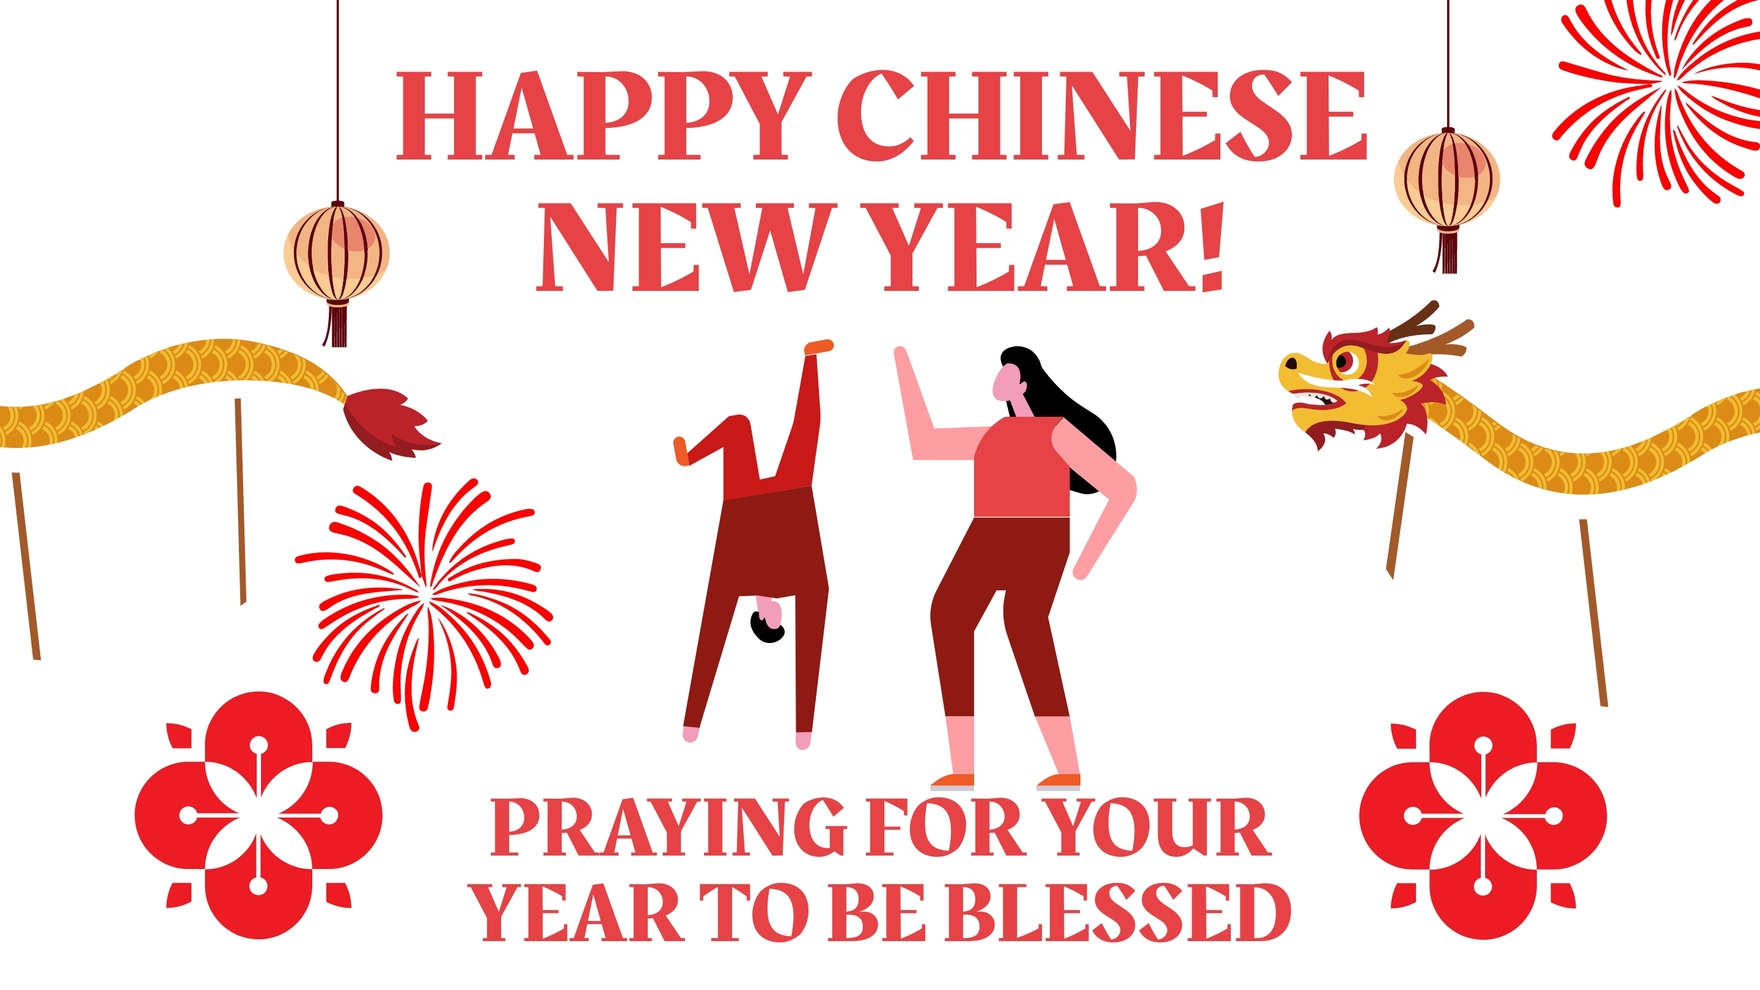 Free Chinese New Year Greeting Card Background - EPS, Illustrator, JPG,  PSD, PNG, PDF, SVG 